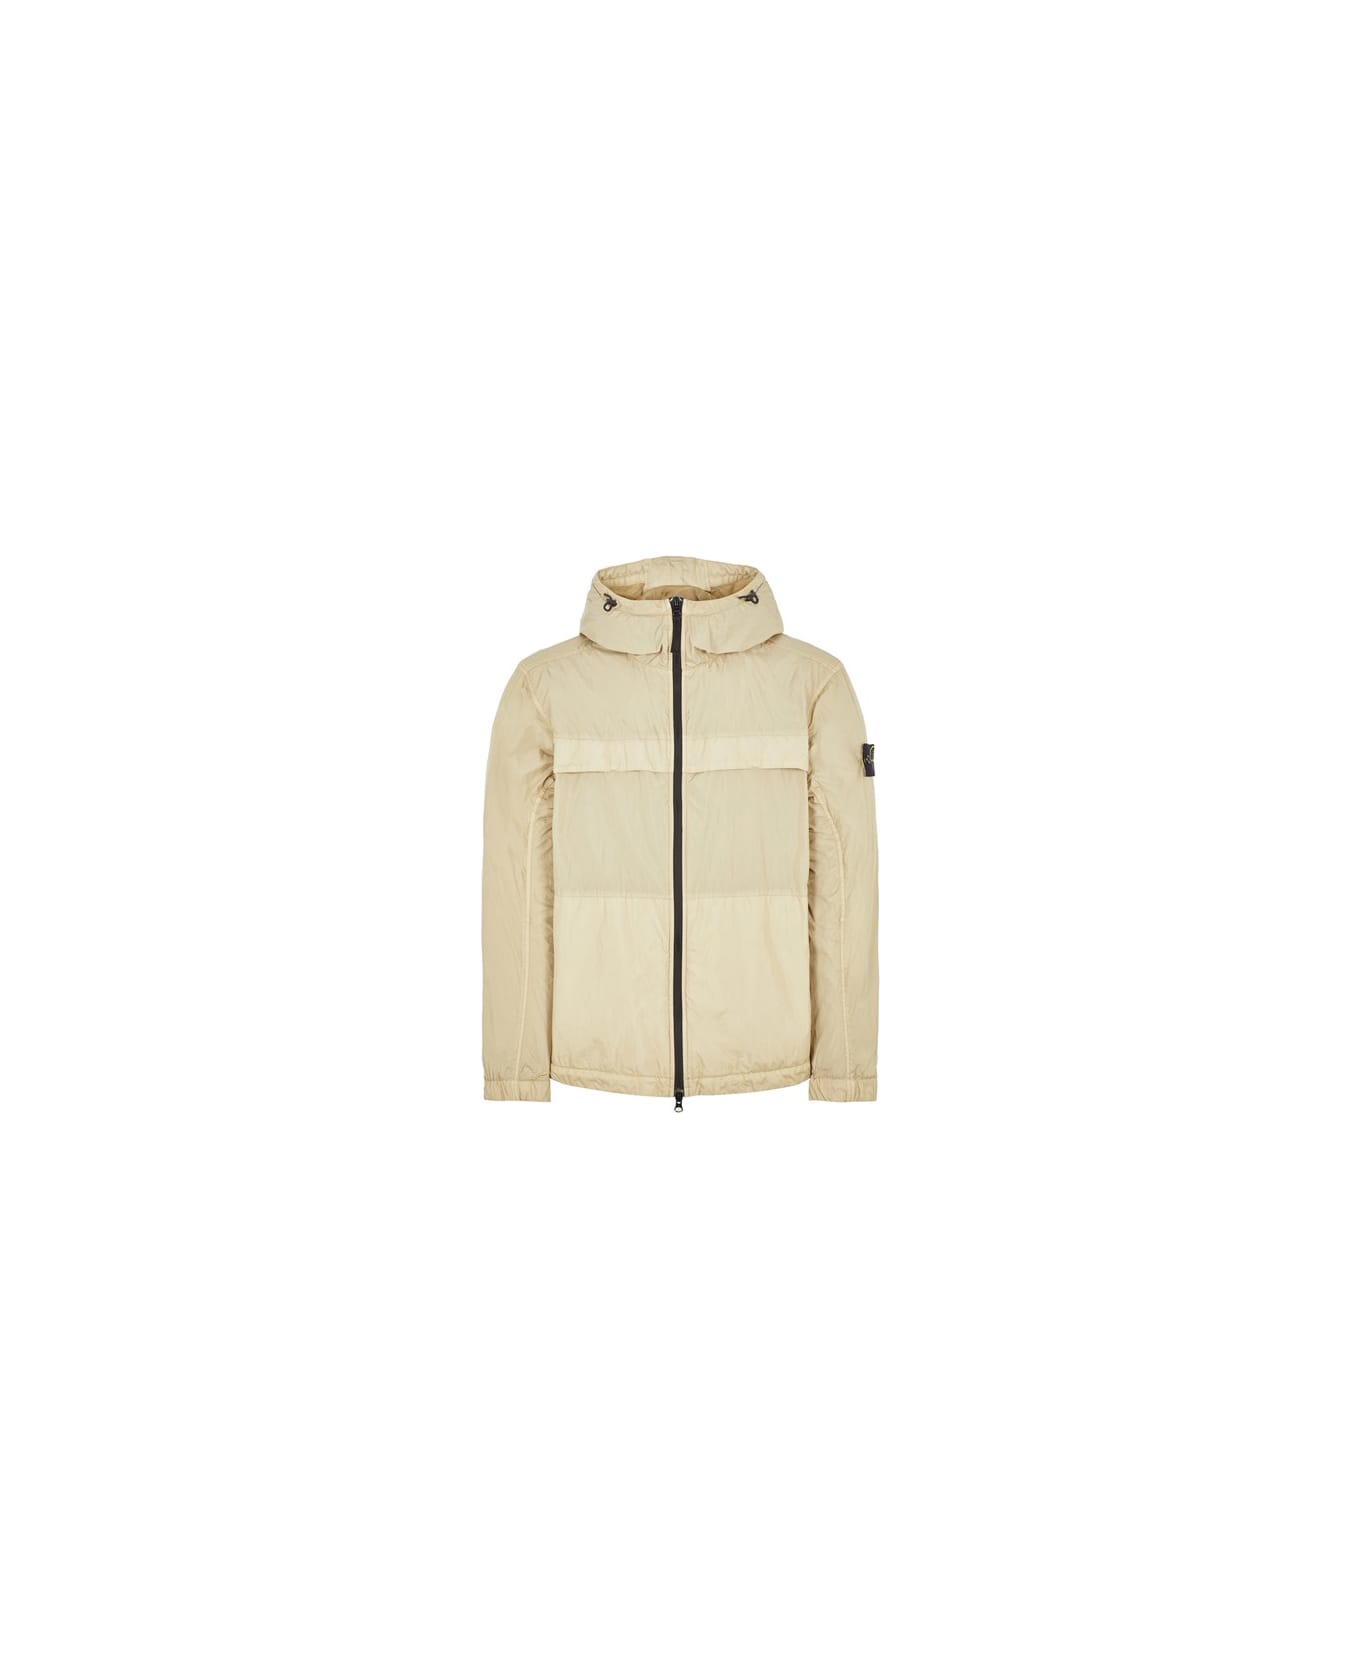 Stone Island Garment Dyed Crinkle Reps Jacket - Nude & Neutrals